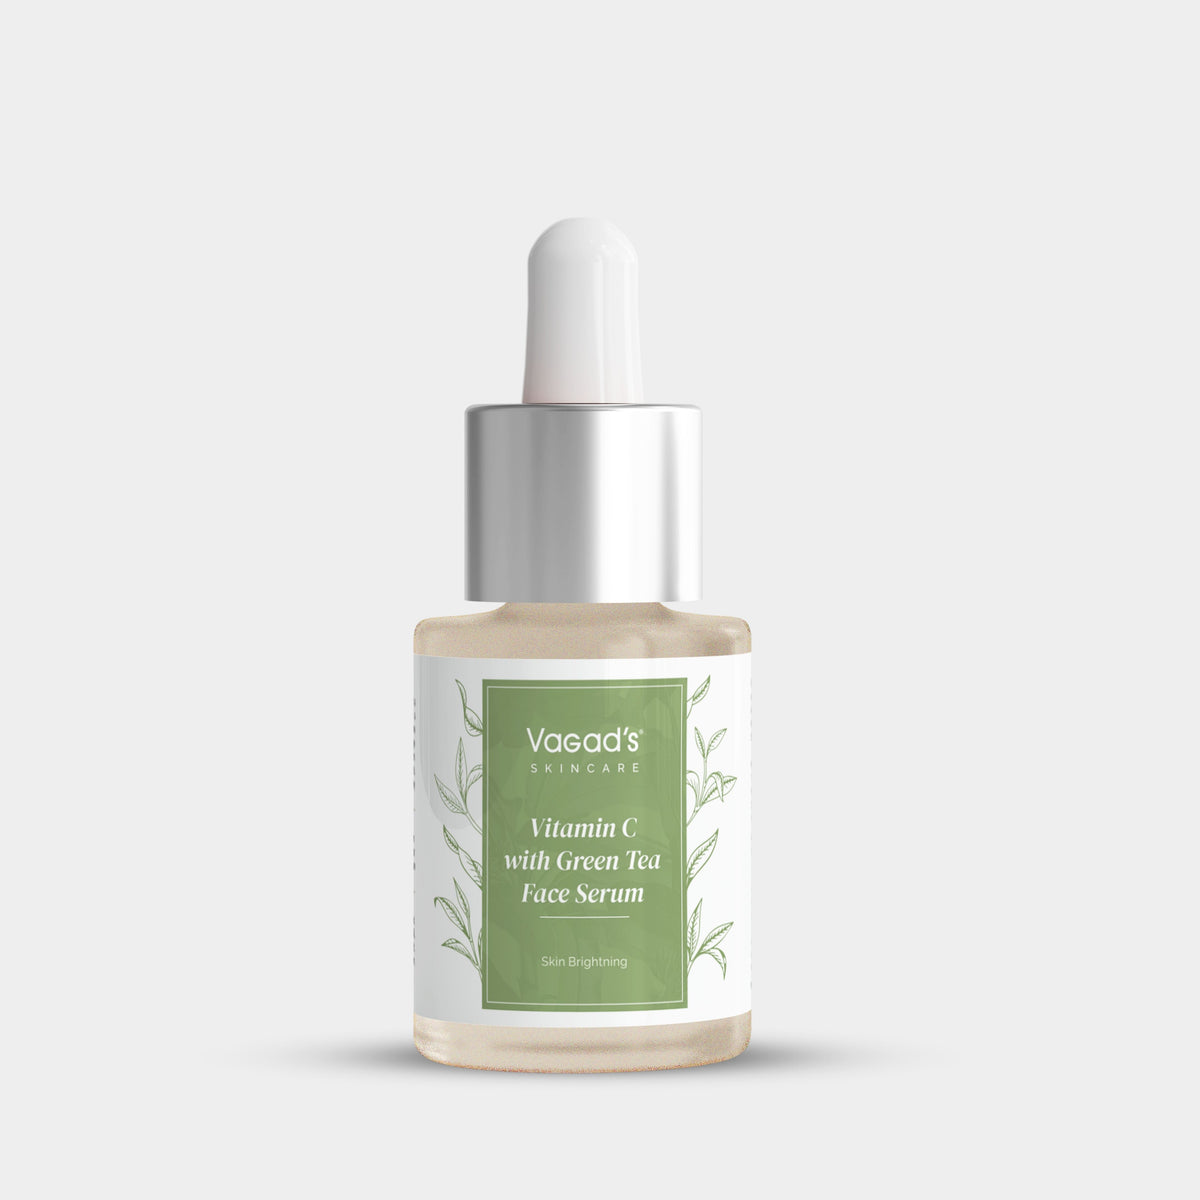 10% Vitamin C with Green Tea Face Serum for glowing skin, 30ml